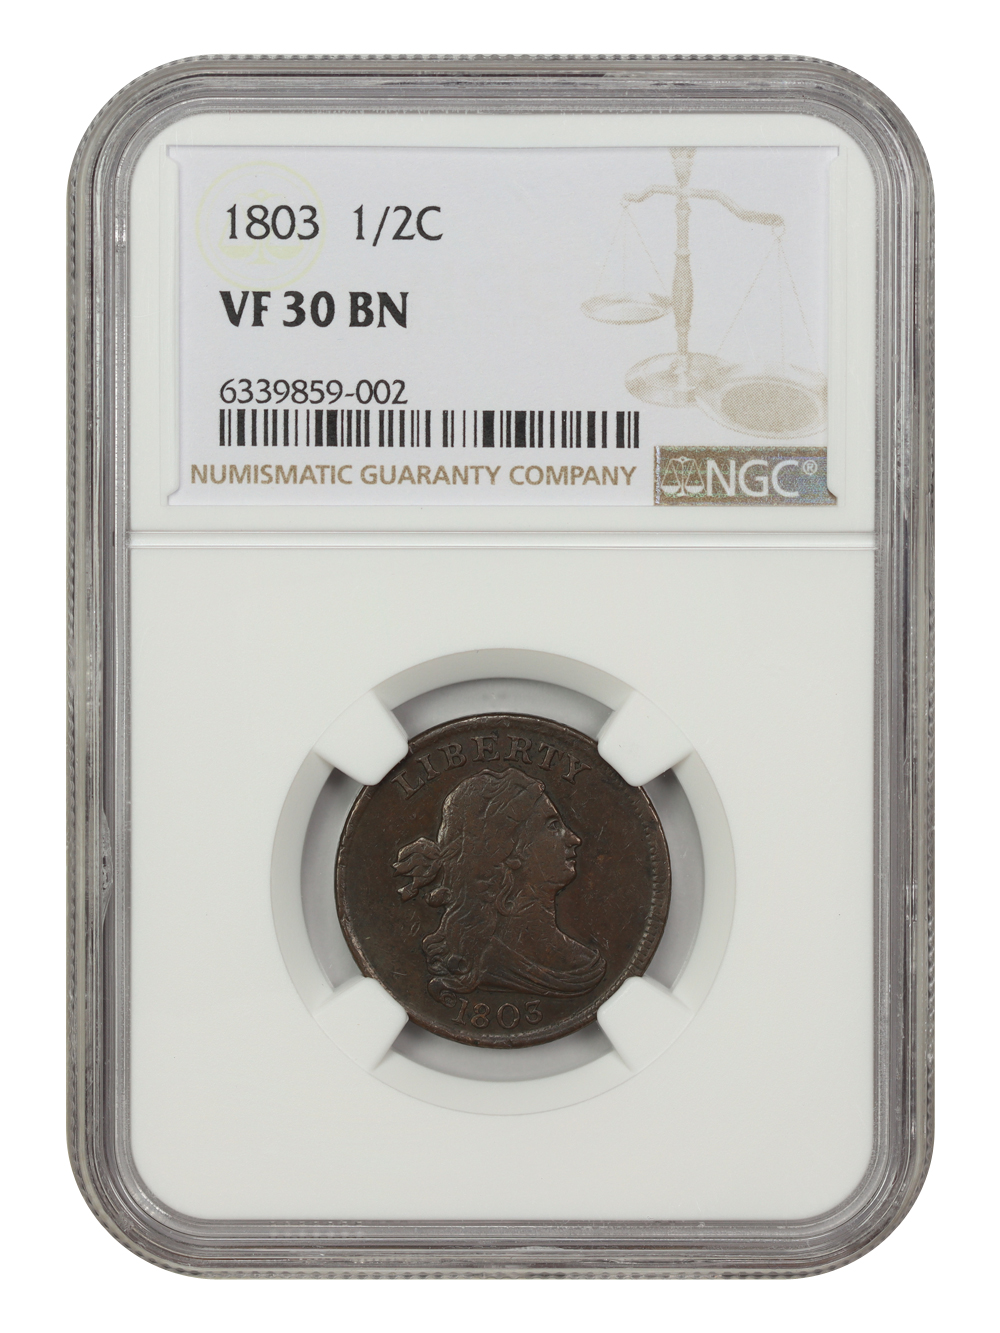 David Lawrence Rare Coins | PCGS | NGC | CAC | Buy, Sell, Auction 